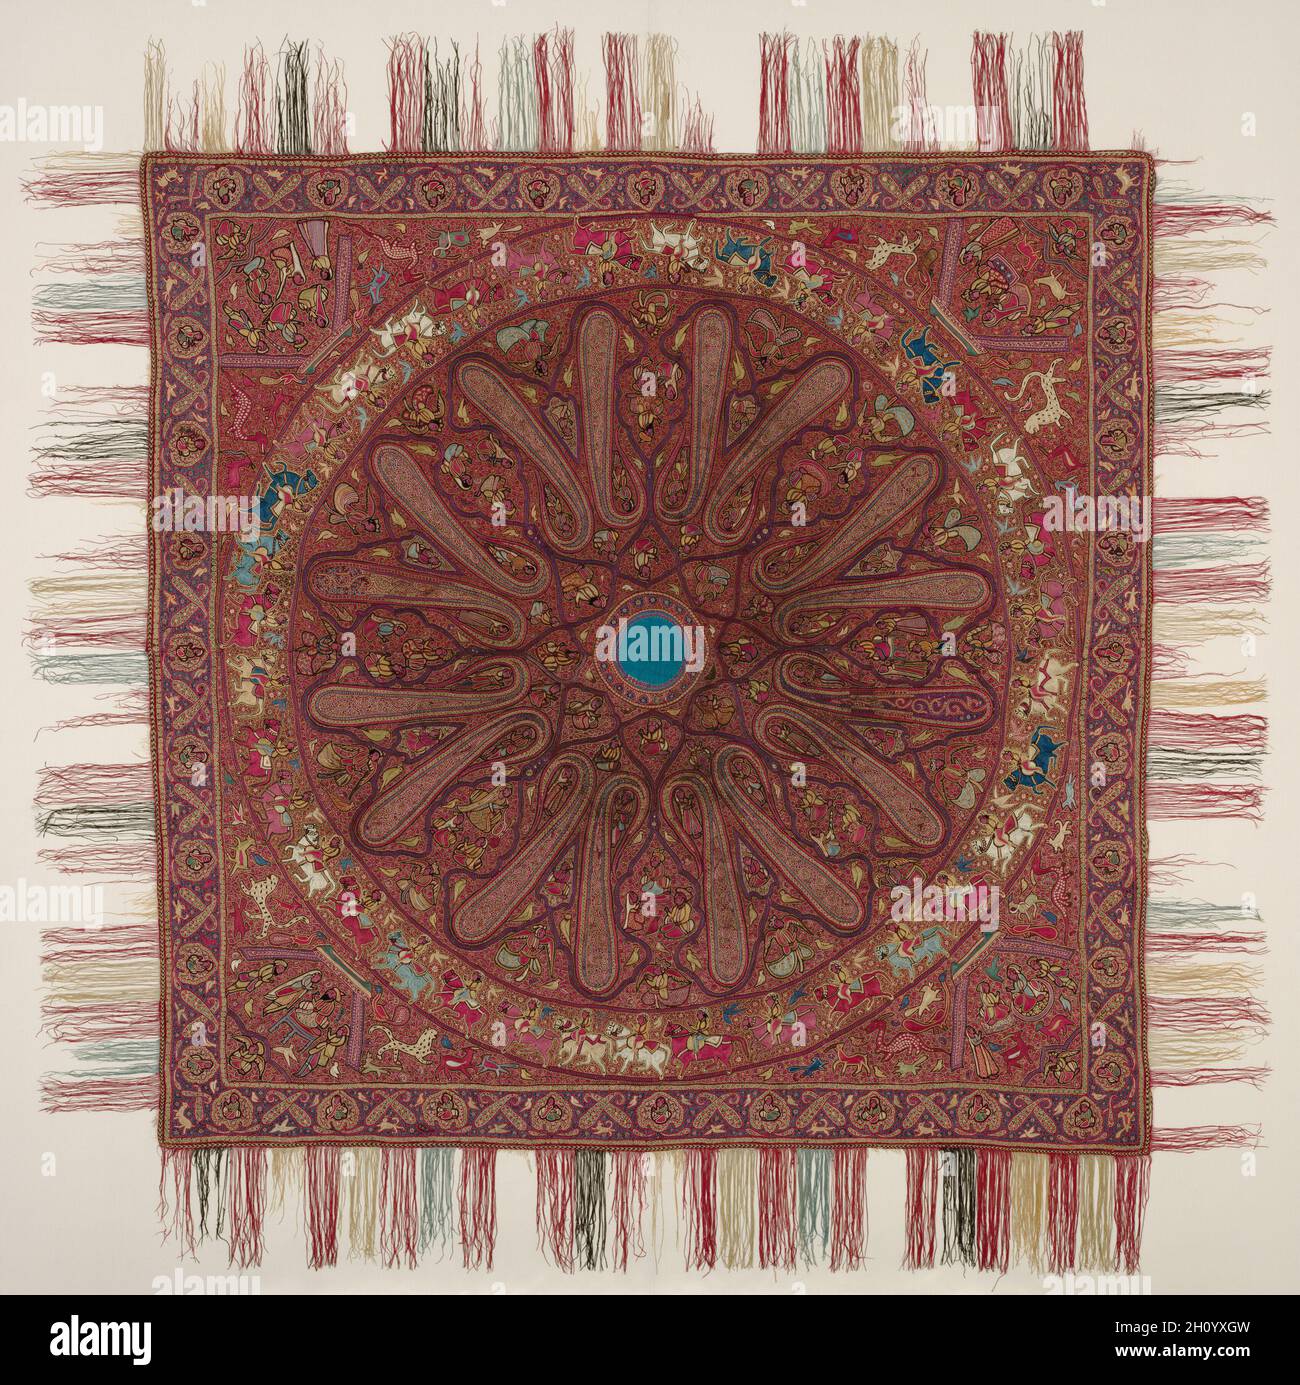 Square Shawl, c. 1850-70. India, Kashmir. Silk and silver filé, wool: chain stitch embroidery; overall including fringe: 212.1 x 212.1 cm (83 1/2 x 83 1/2 in.).  By the 1800s, the Himalayan foothill region of Kashmir was renowned for distinctive embroideries, and Kashmiri shawls were coveted by women throughout the British Empire. The center of this square shawl is in the form of an eight-petaled lotus, a symbol for the sun, and around it are the elongated forms of slender cypress trees, which became the inspiration for paisley. Every space is populated with figures: seated, standing, male, fe Stock Photo